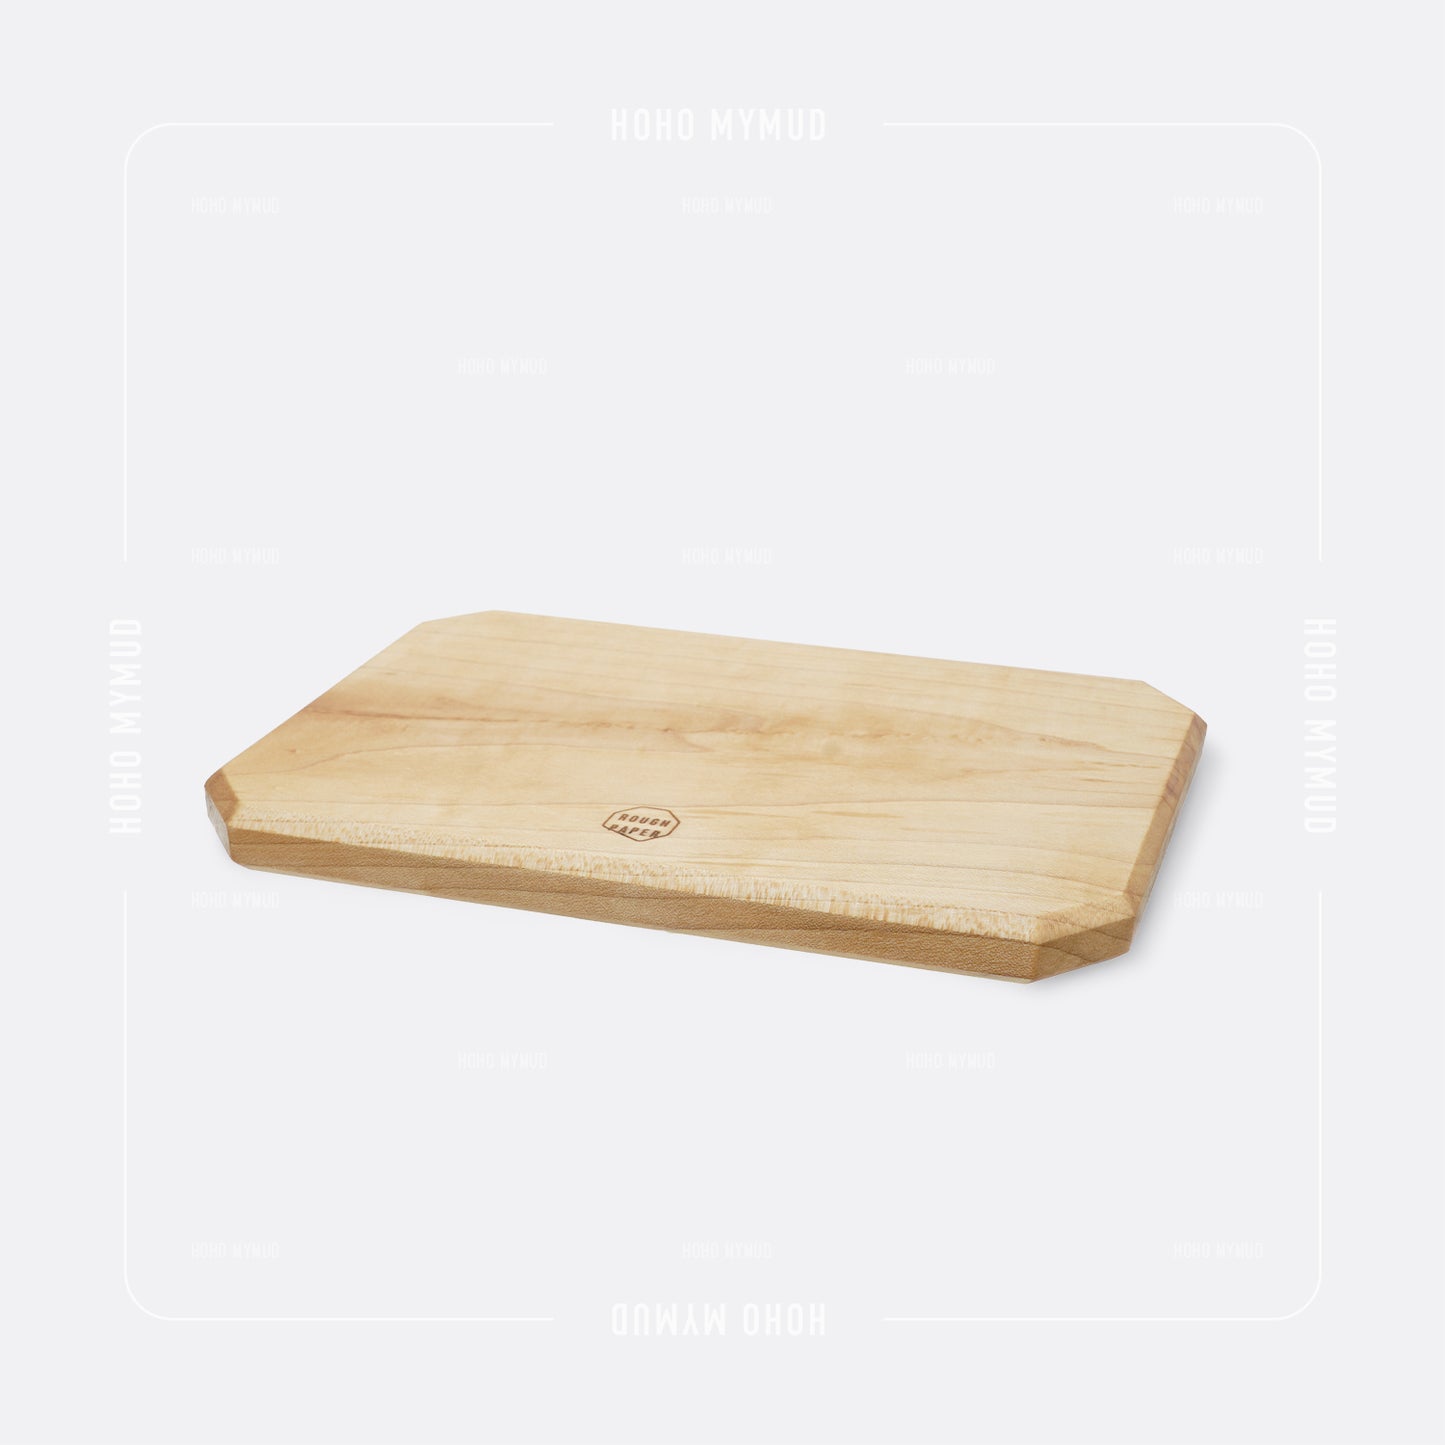 Rough Paper Wooden Cutting Board for Trangia Mess Tin 209 加拿大白楓木製便攜砧板